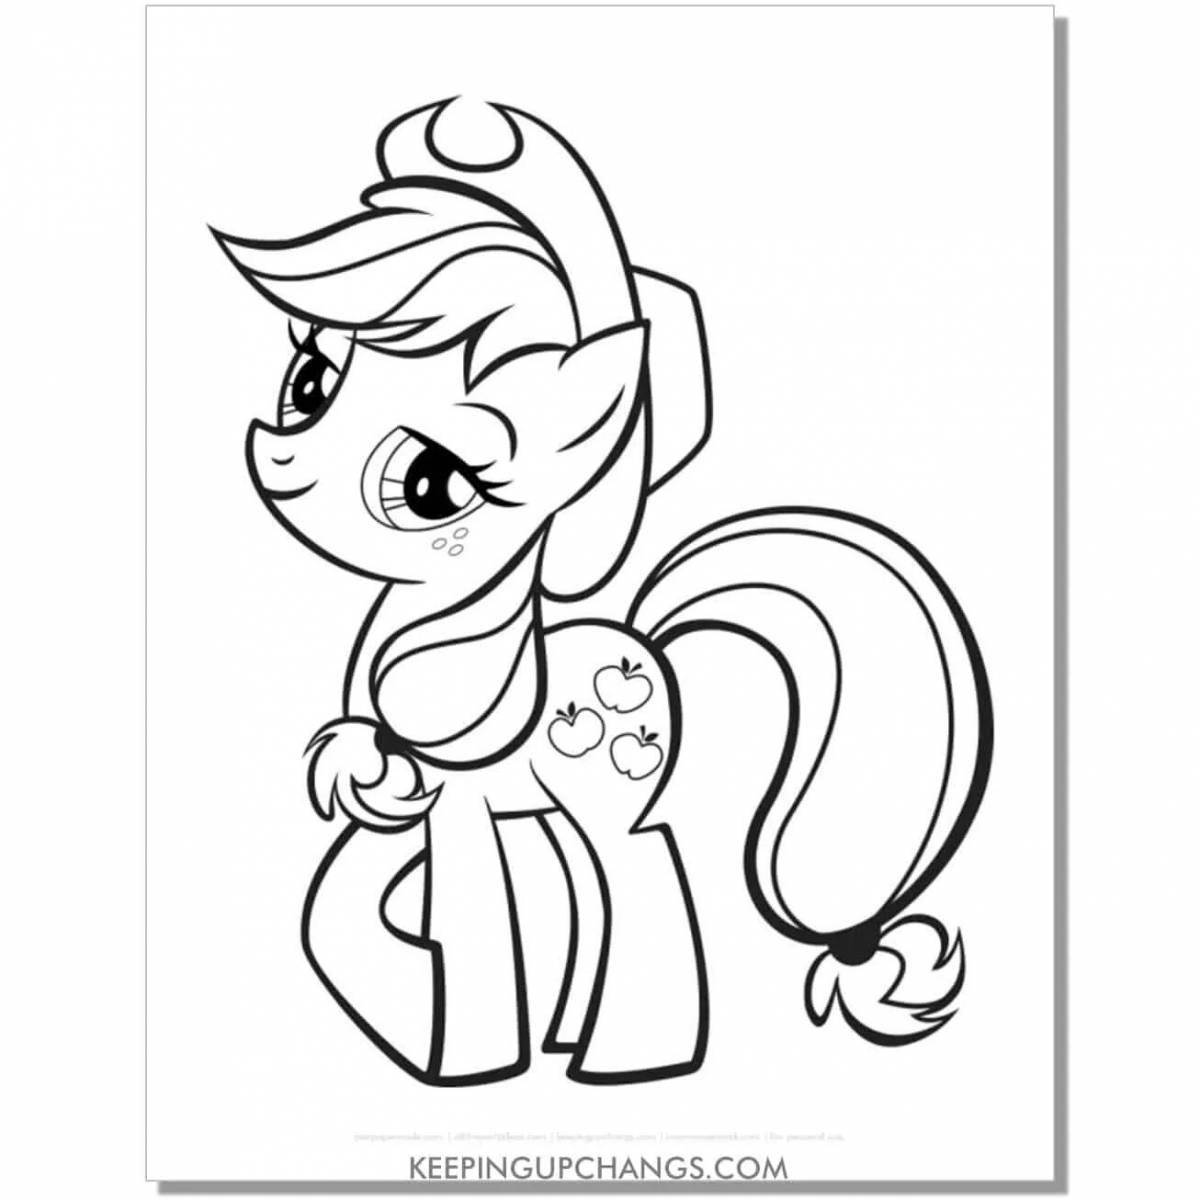 Moo little pony fantastic coloring book